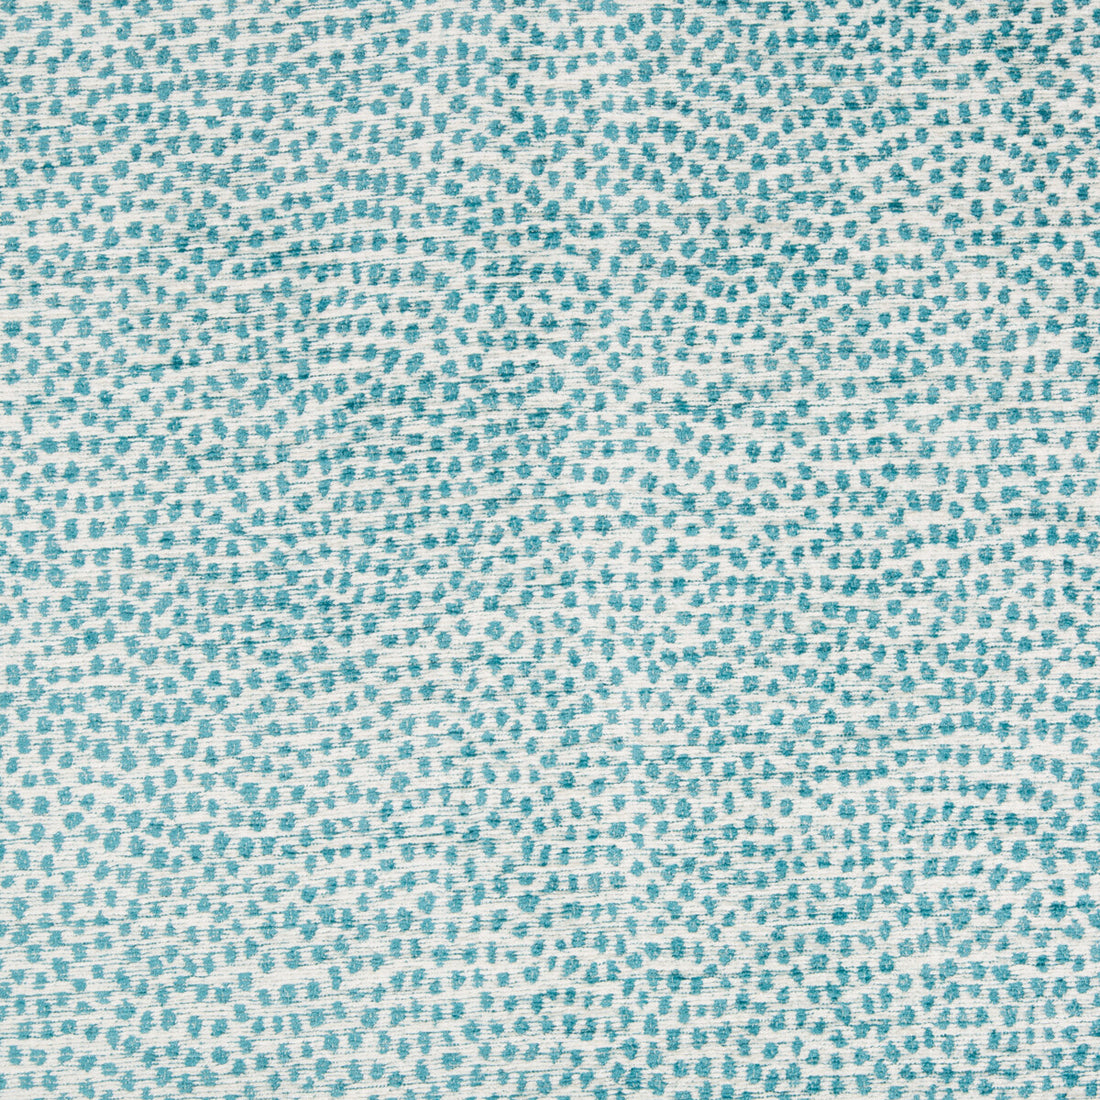 Kravet Contract fabric in 35012-13 color - pattern 35012.13.0 - by Kravet Contract in the Incase Crypton Gis collection